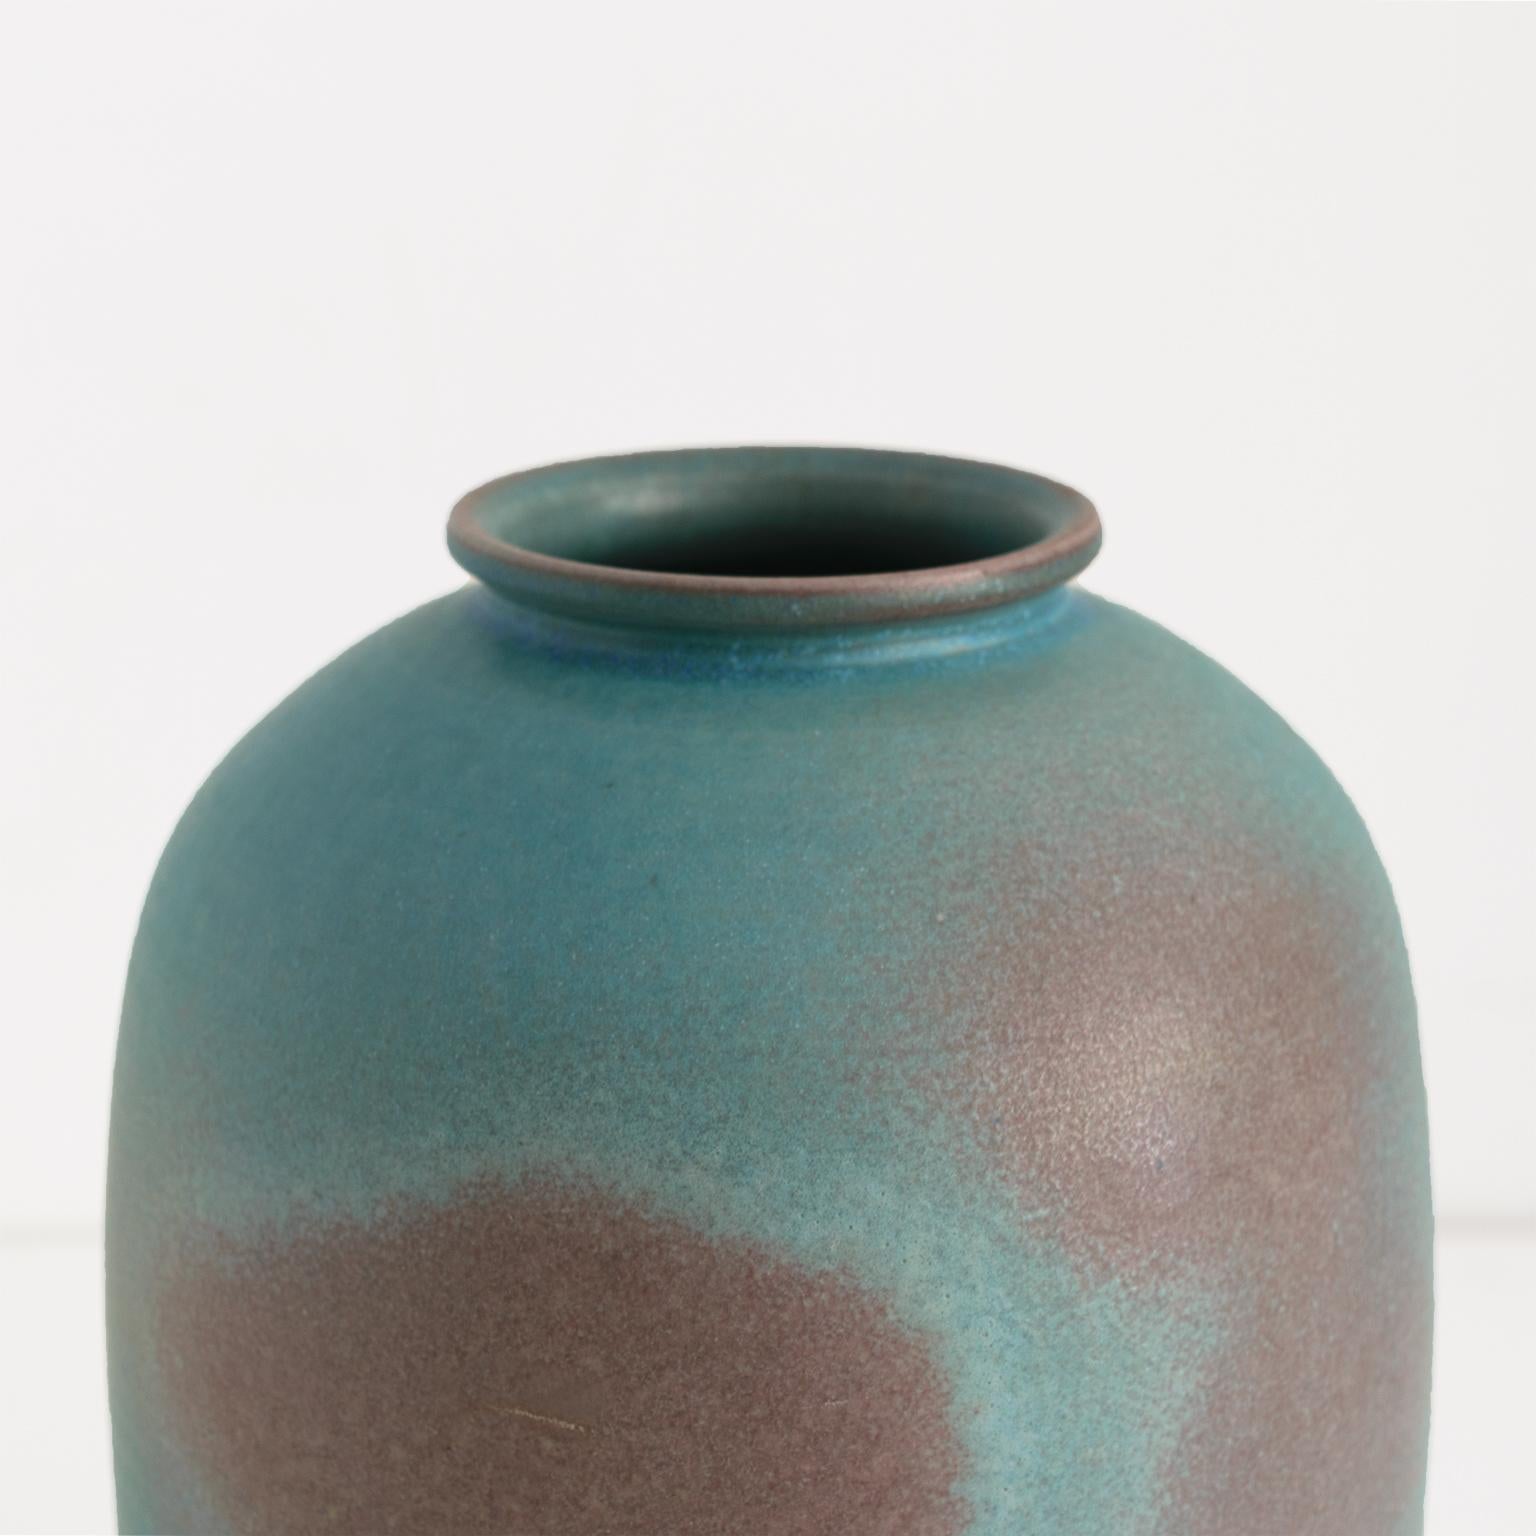 BO SCULLMAN unique vase in stoneware from his own workshop, glazed in muted turquoise and violet glazes, Signed on bottom “Bo Scullman”, circa 1990
Measures: Height 11”, diameter 7”.